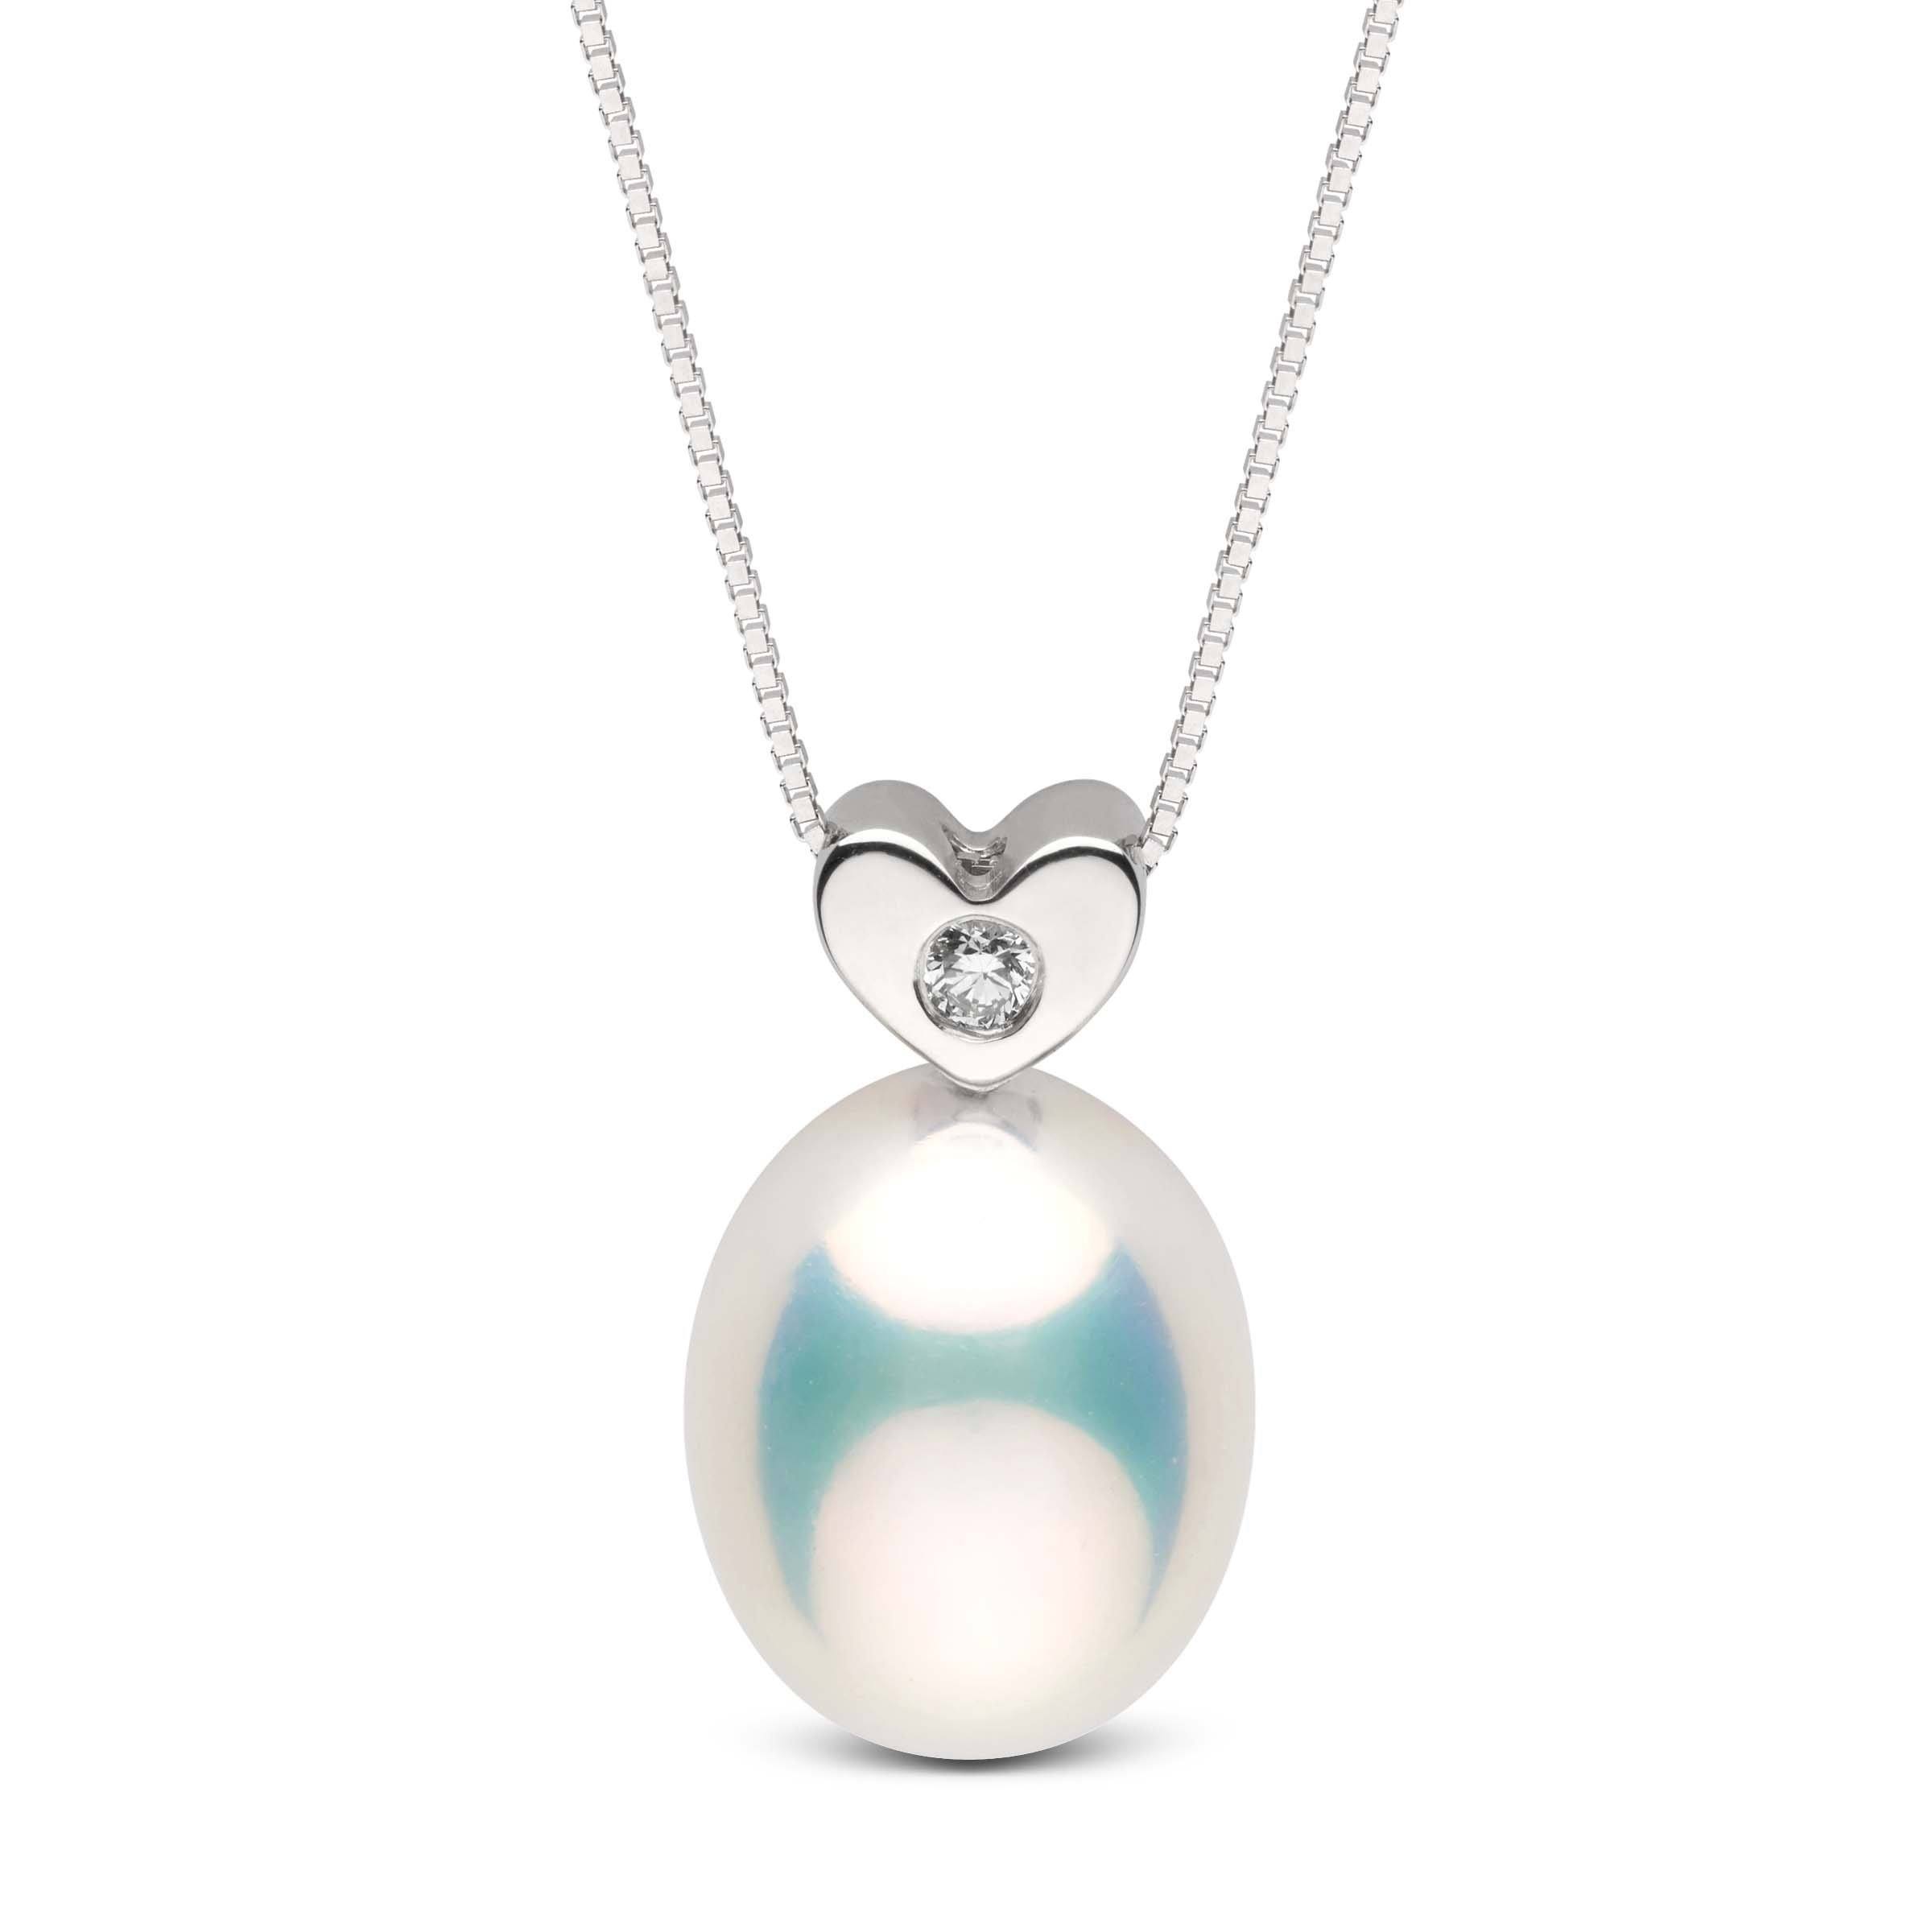 Baby Heart Collection Metallic White Freshwater Drop 9.0-10.0 mm Pearl and Diamond Pendant